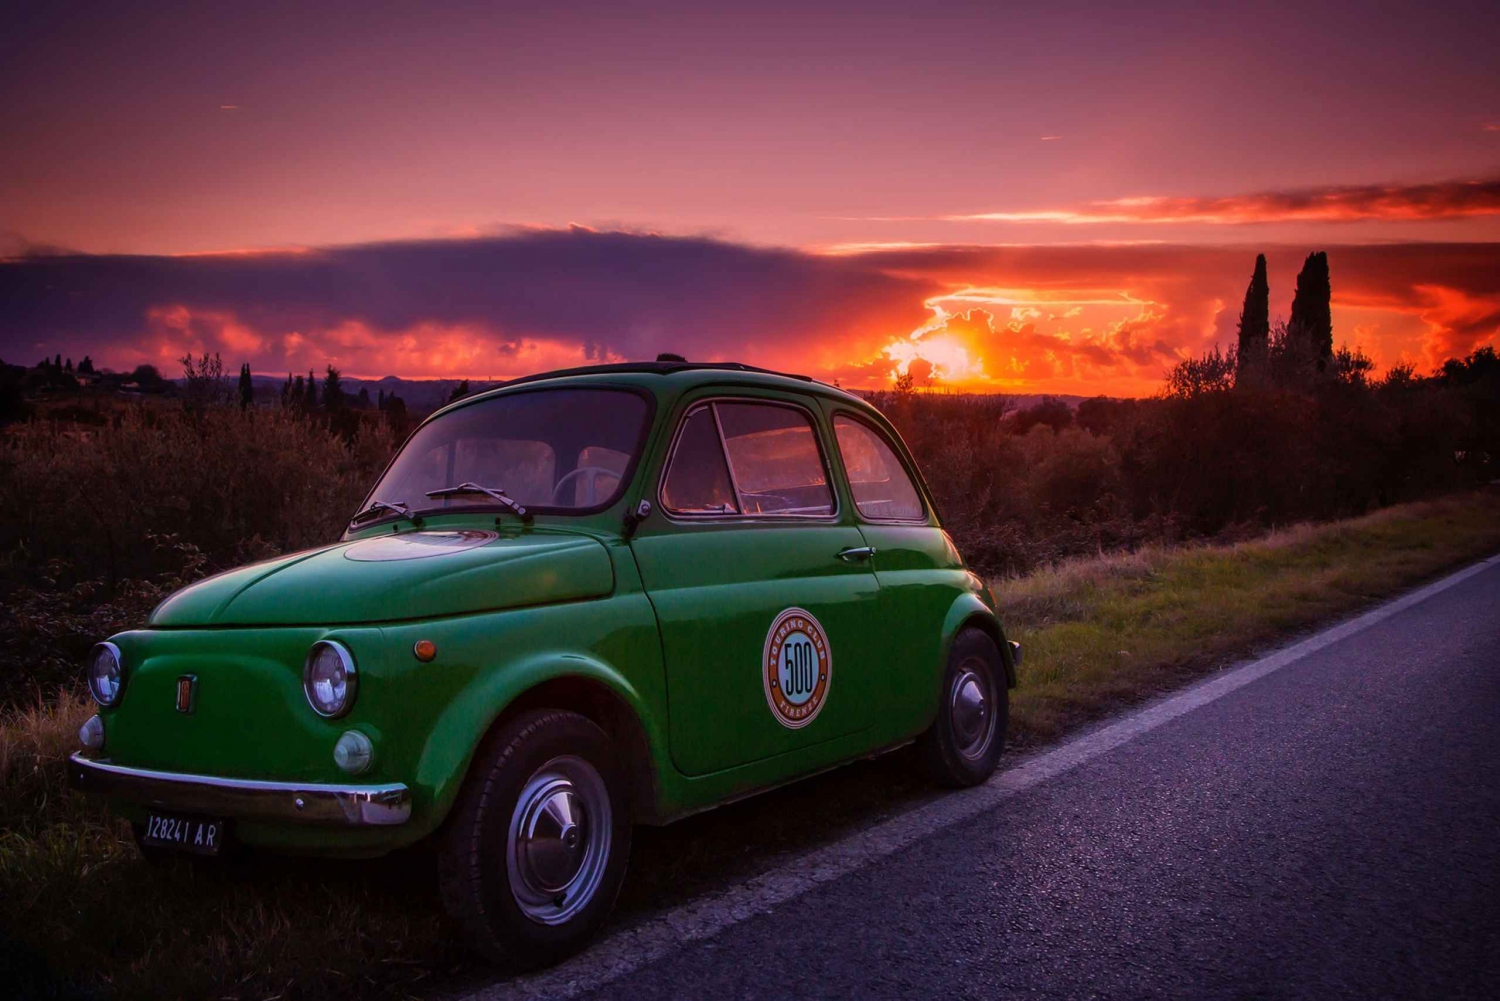 From Florence: Sunset Wine Tasting Tour in Vintage Car